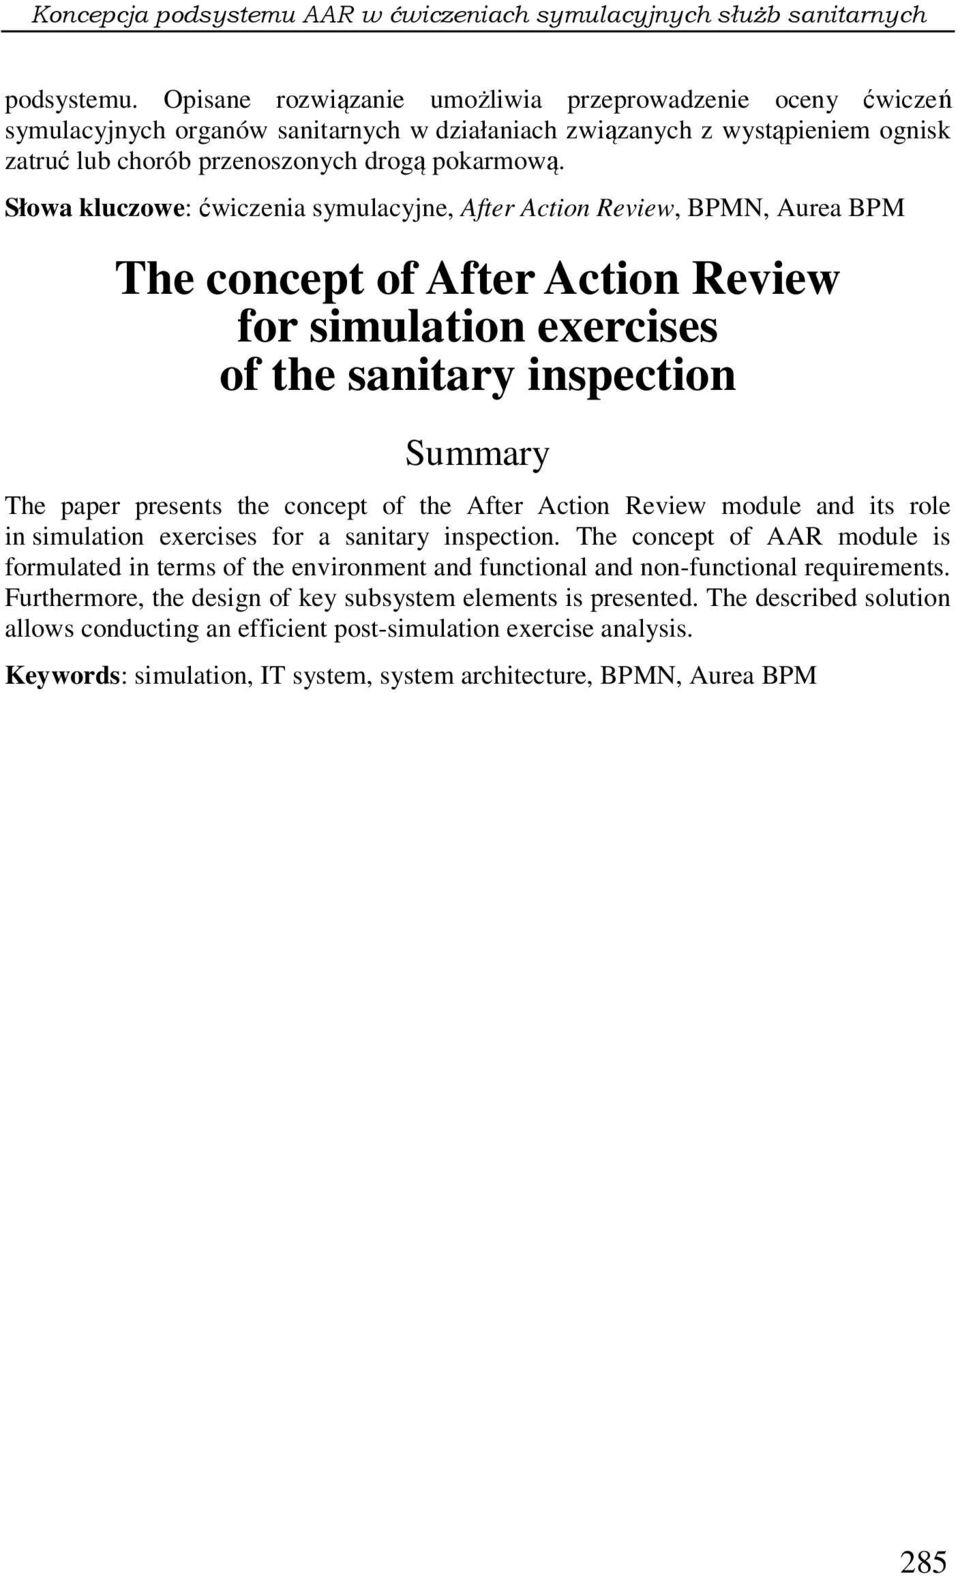 Słowa kluczowe: ćwiczenia symulacyjne, After Action Review, BPMN, Aurea BPM The concept of After Action Review for simulation exercises of the sanitary inspection Summary The paper presents the